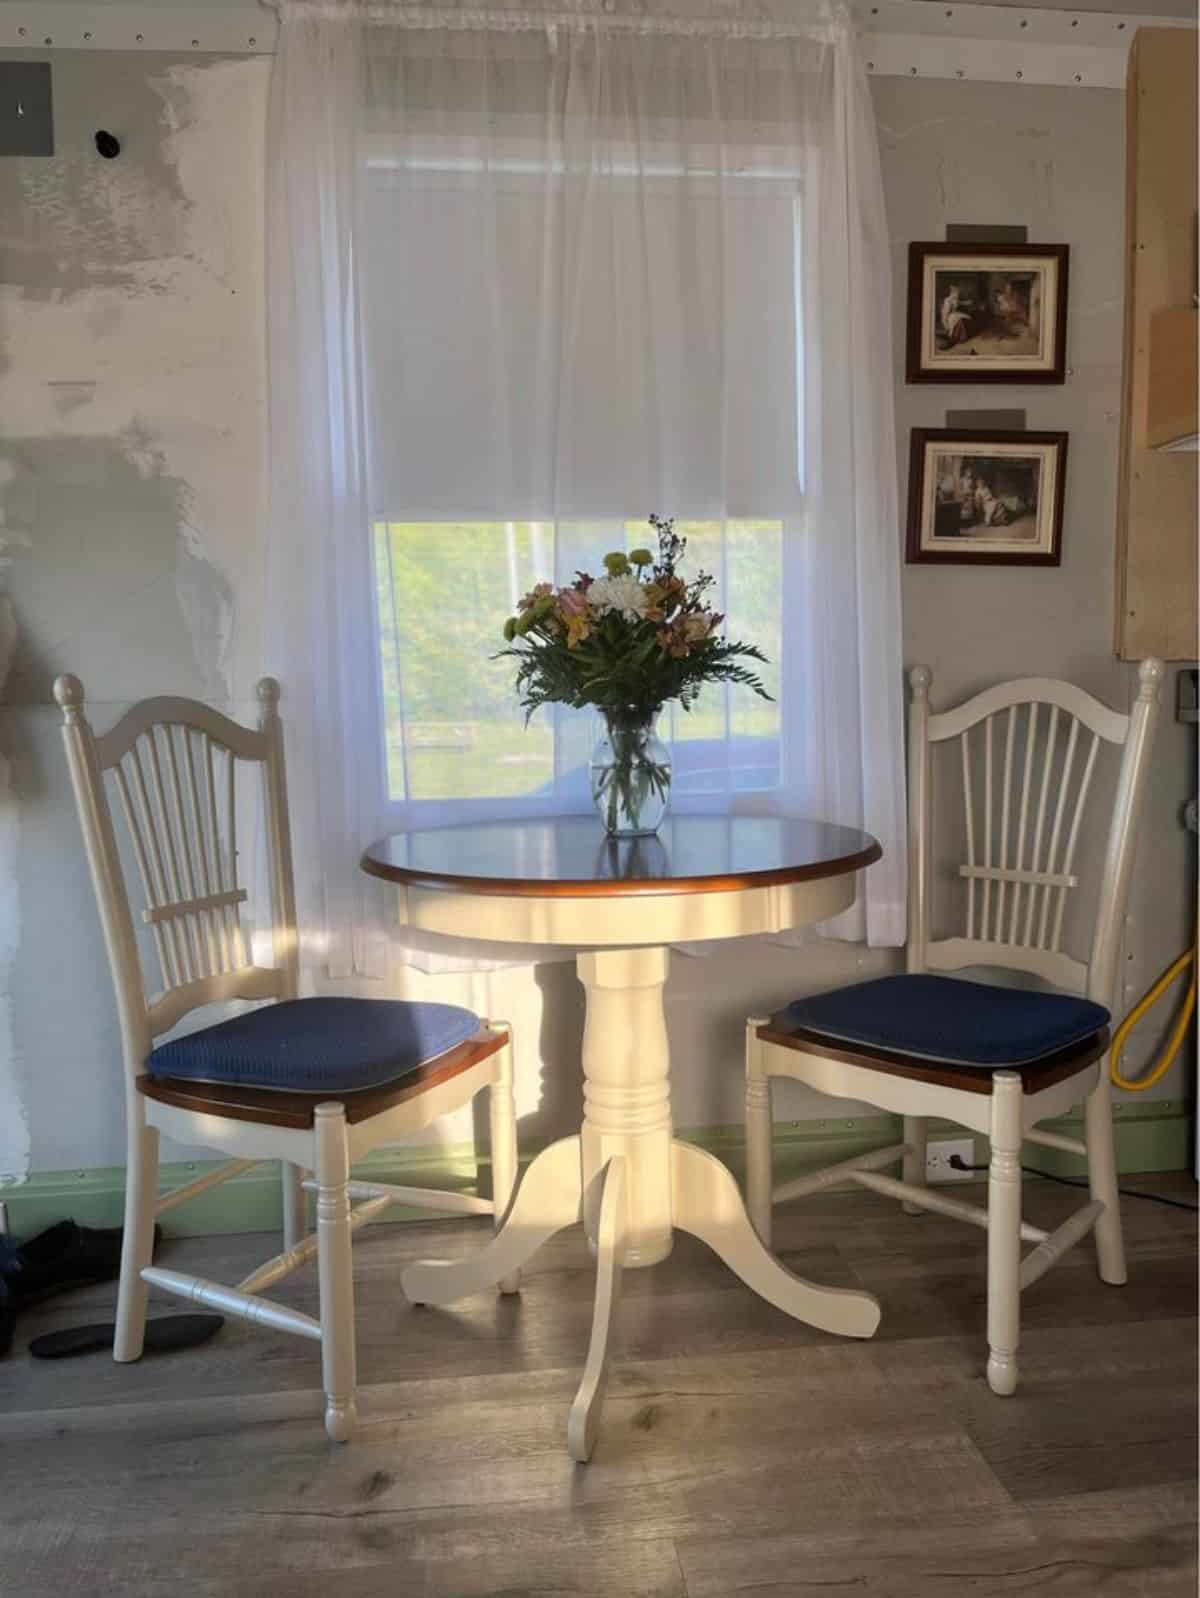 round dining table with chairs in the living area of the house